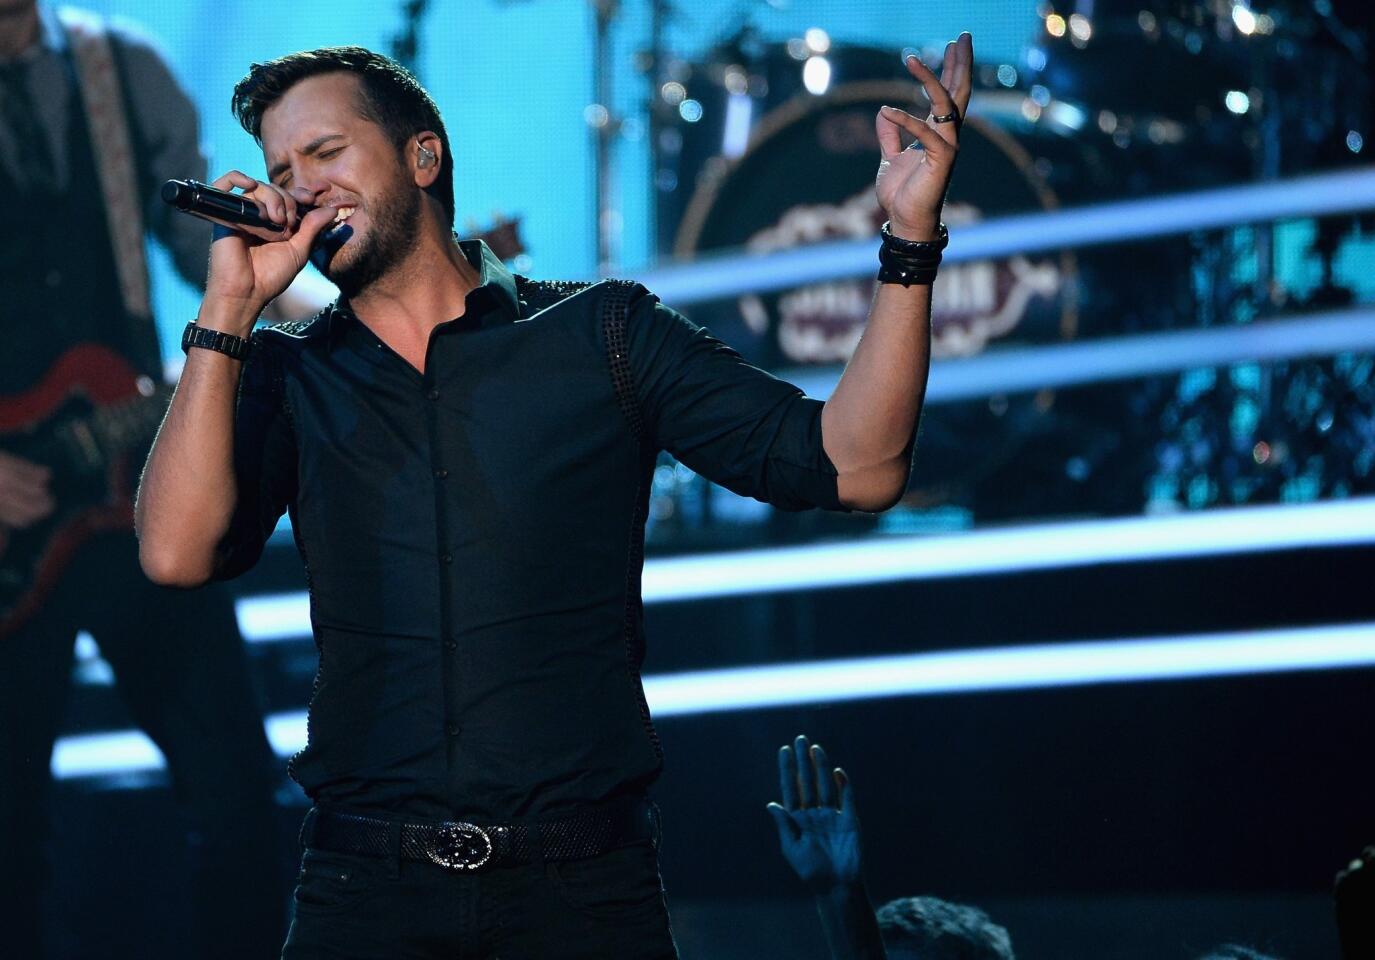 Luke Bryan falls off stage, unscathed